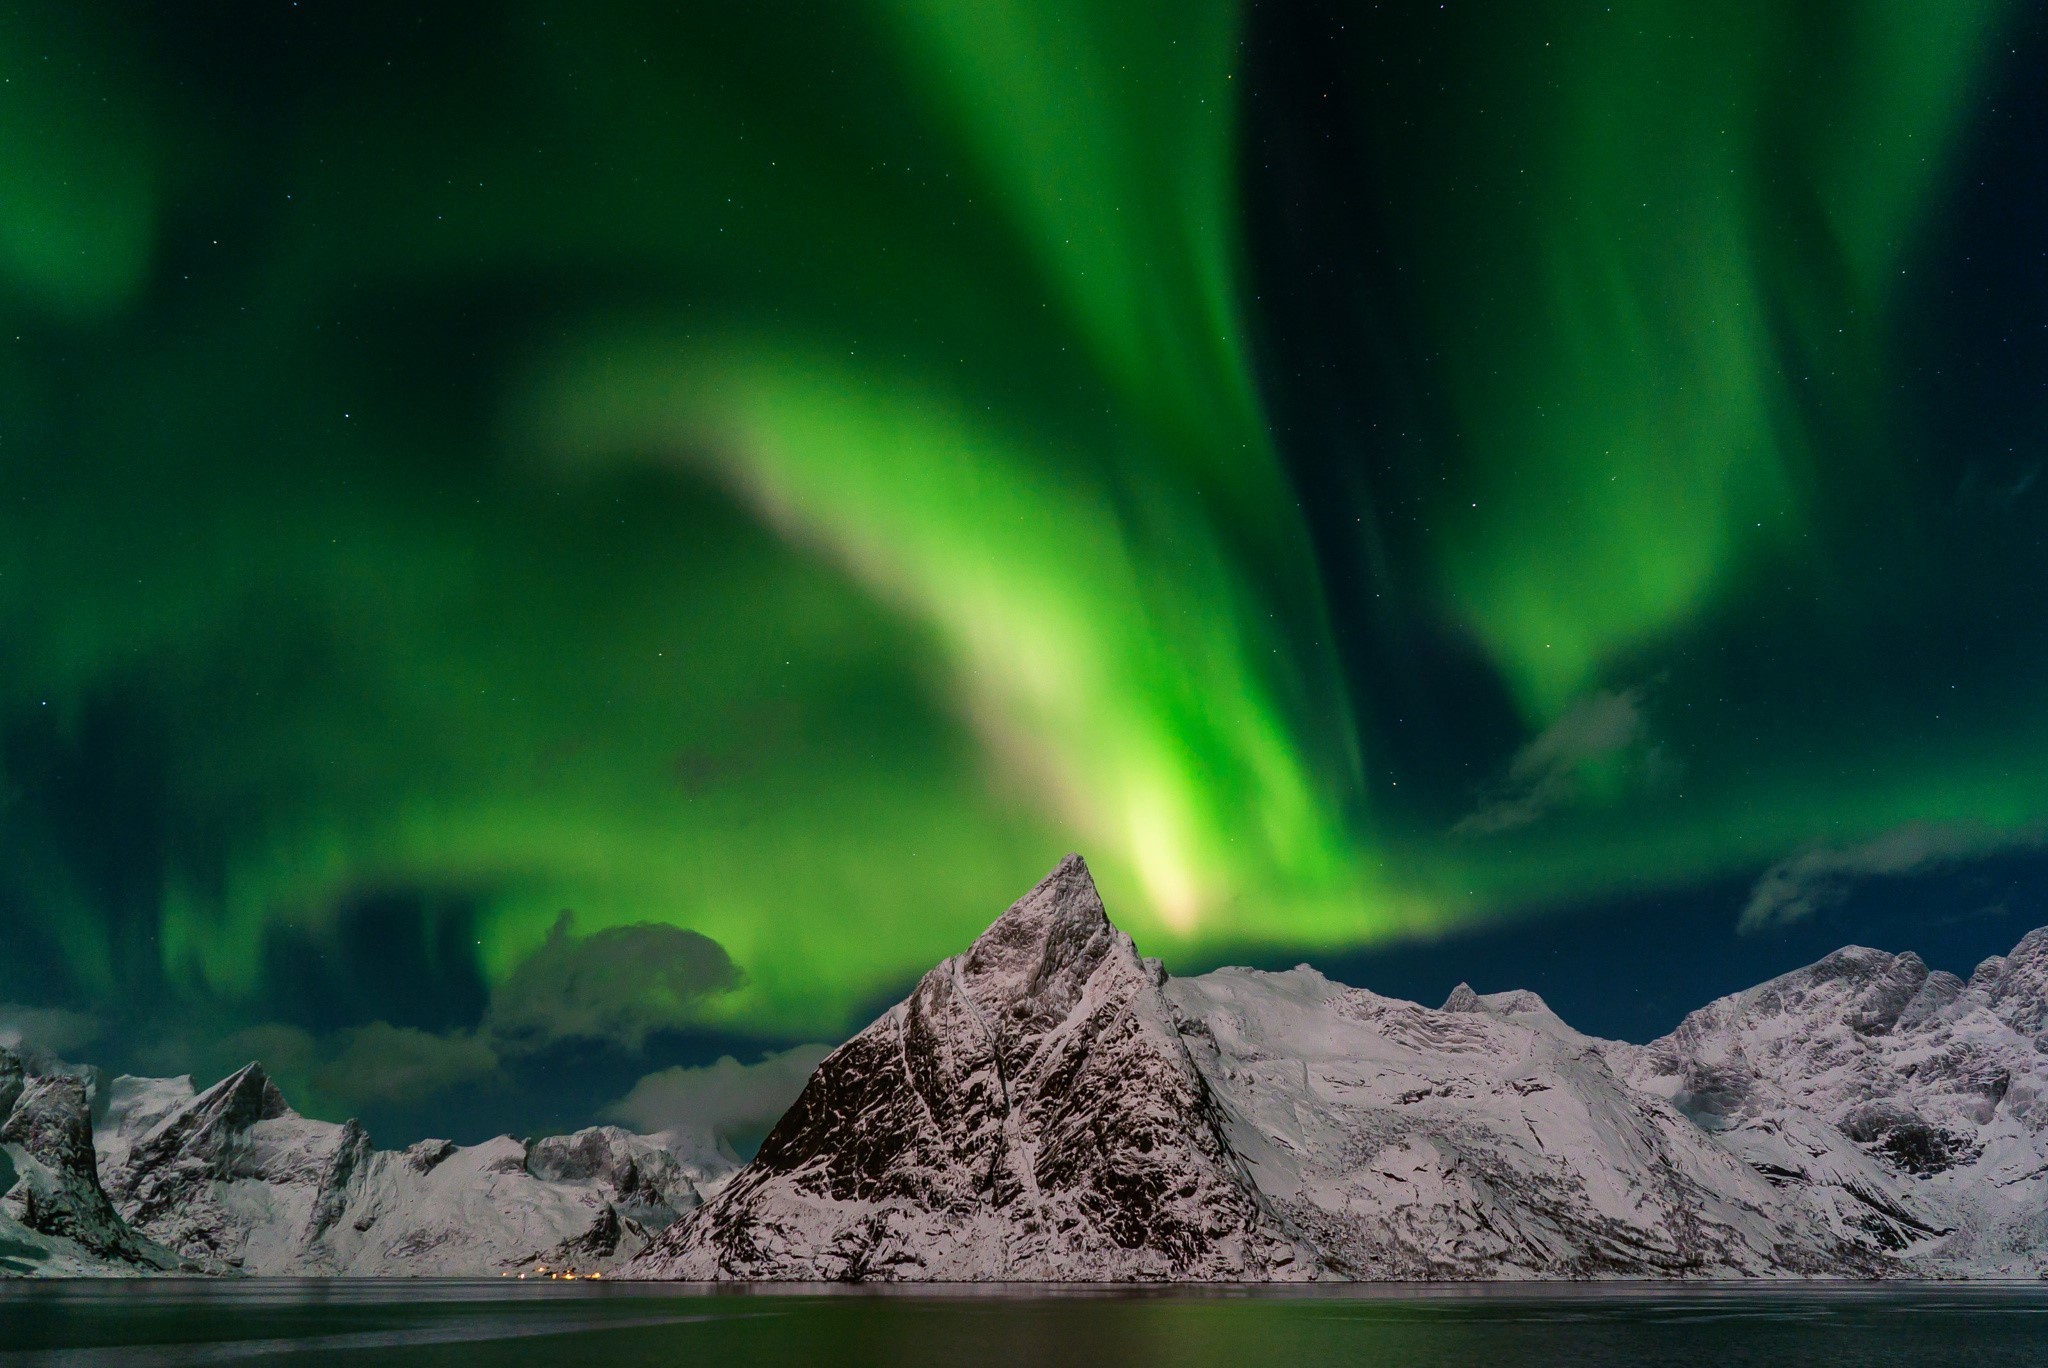 General 2048x1368 Arctic landscape green sky Norway aurorae mountains snow ice night nature